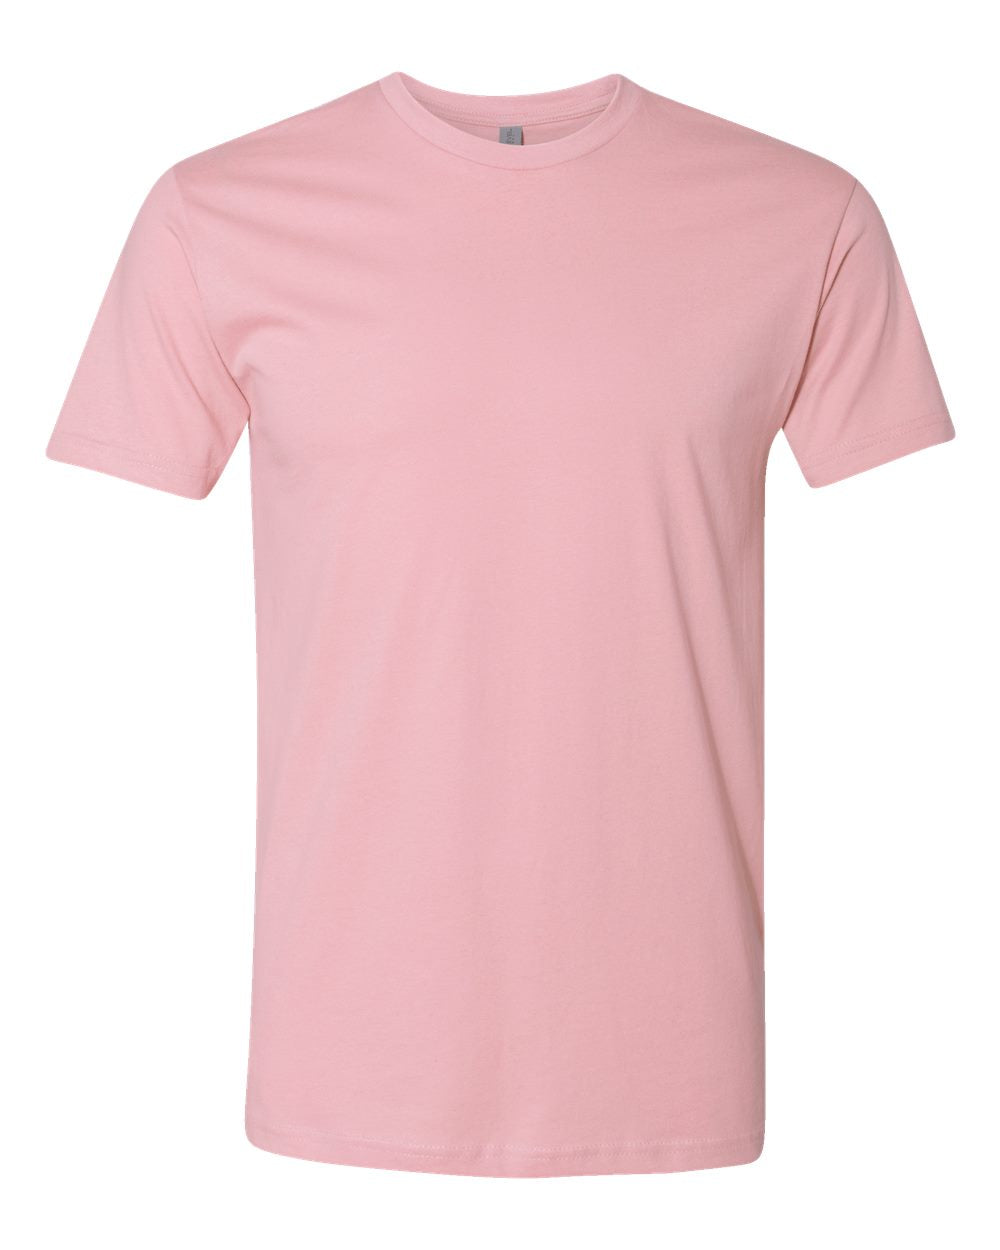 Next Level Cotton Tee (3600) in Light Pink